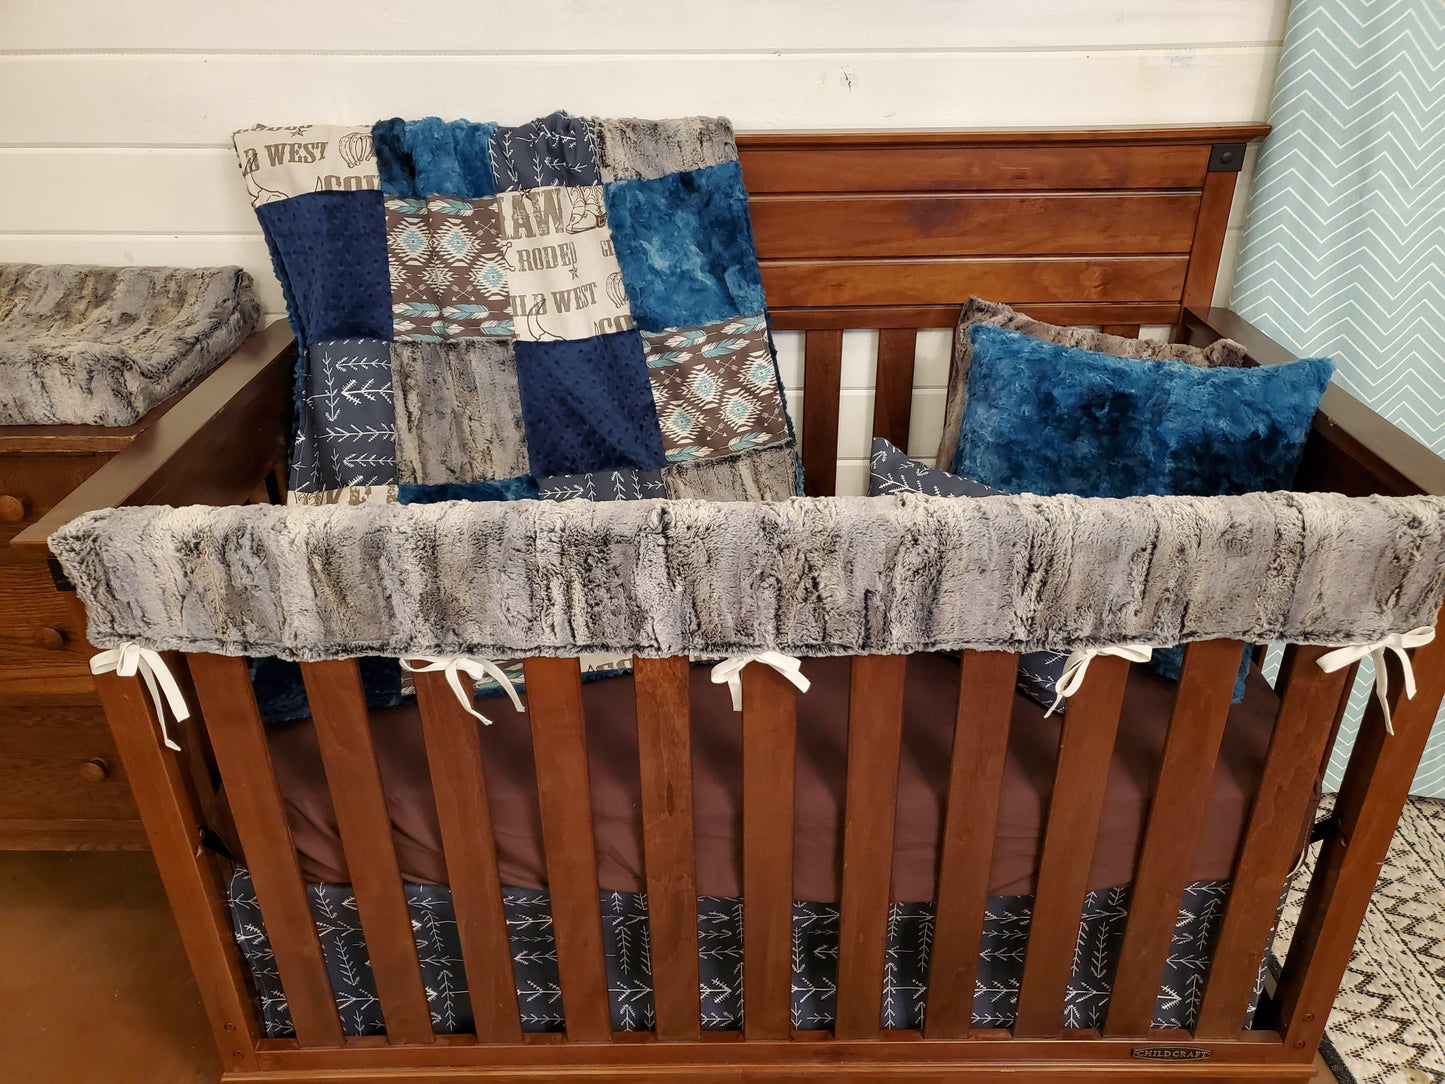 New Release Boy Crib Bedding- Cowboy and Navy Tribal Arrow Western Baby Bedding & Nursery Collection - DBC Baby Bedding Co 